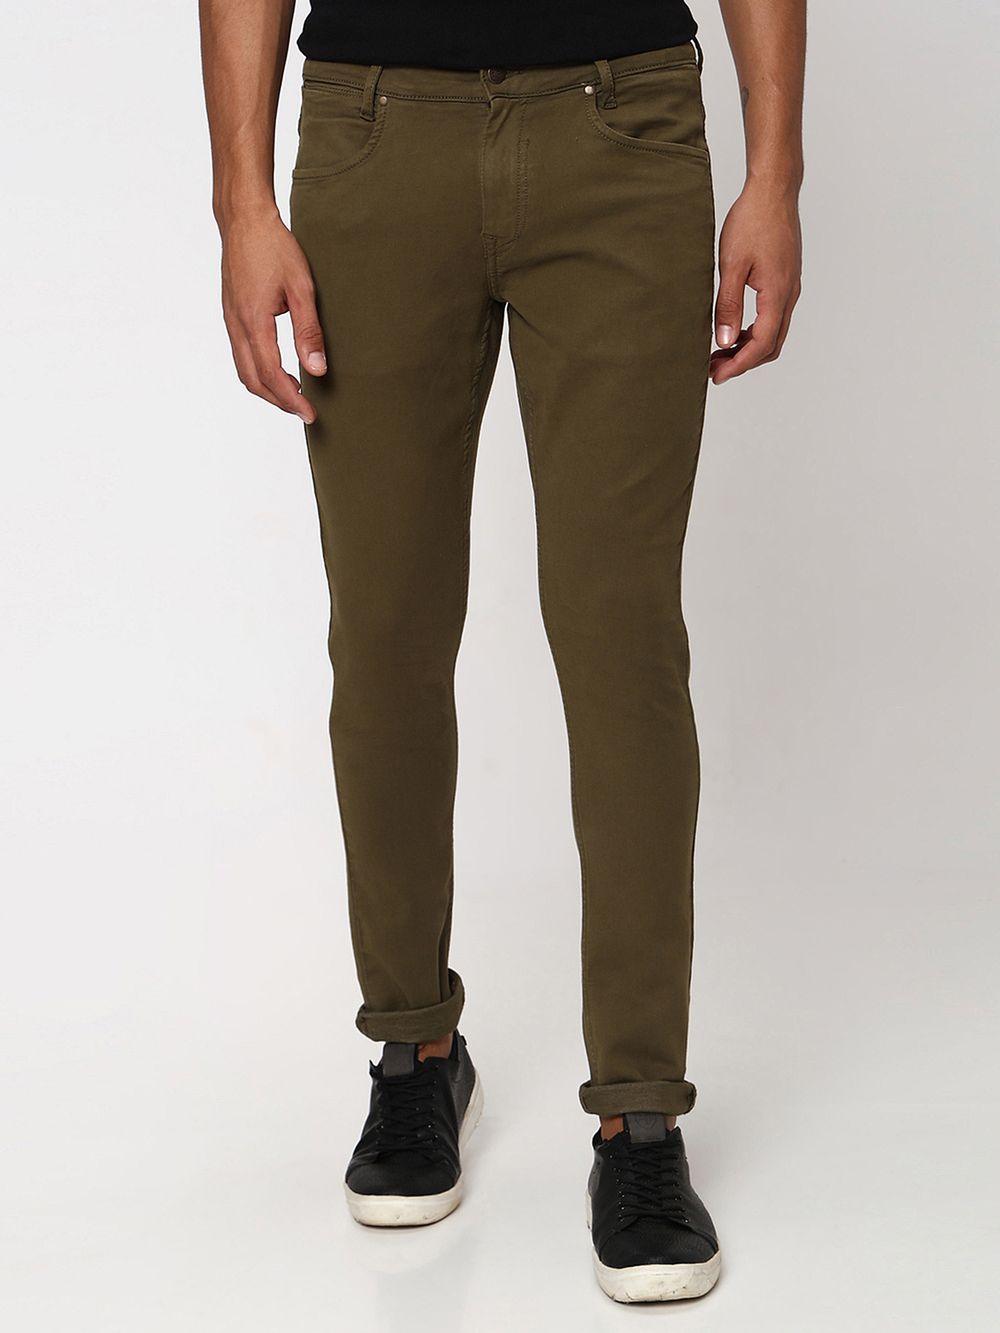 Olive Skinny Fit Superstretch Coloured Jeans